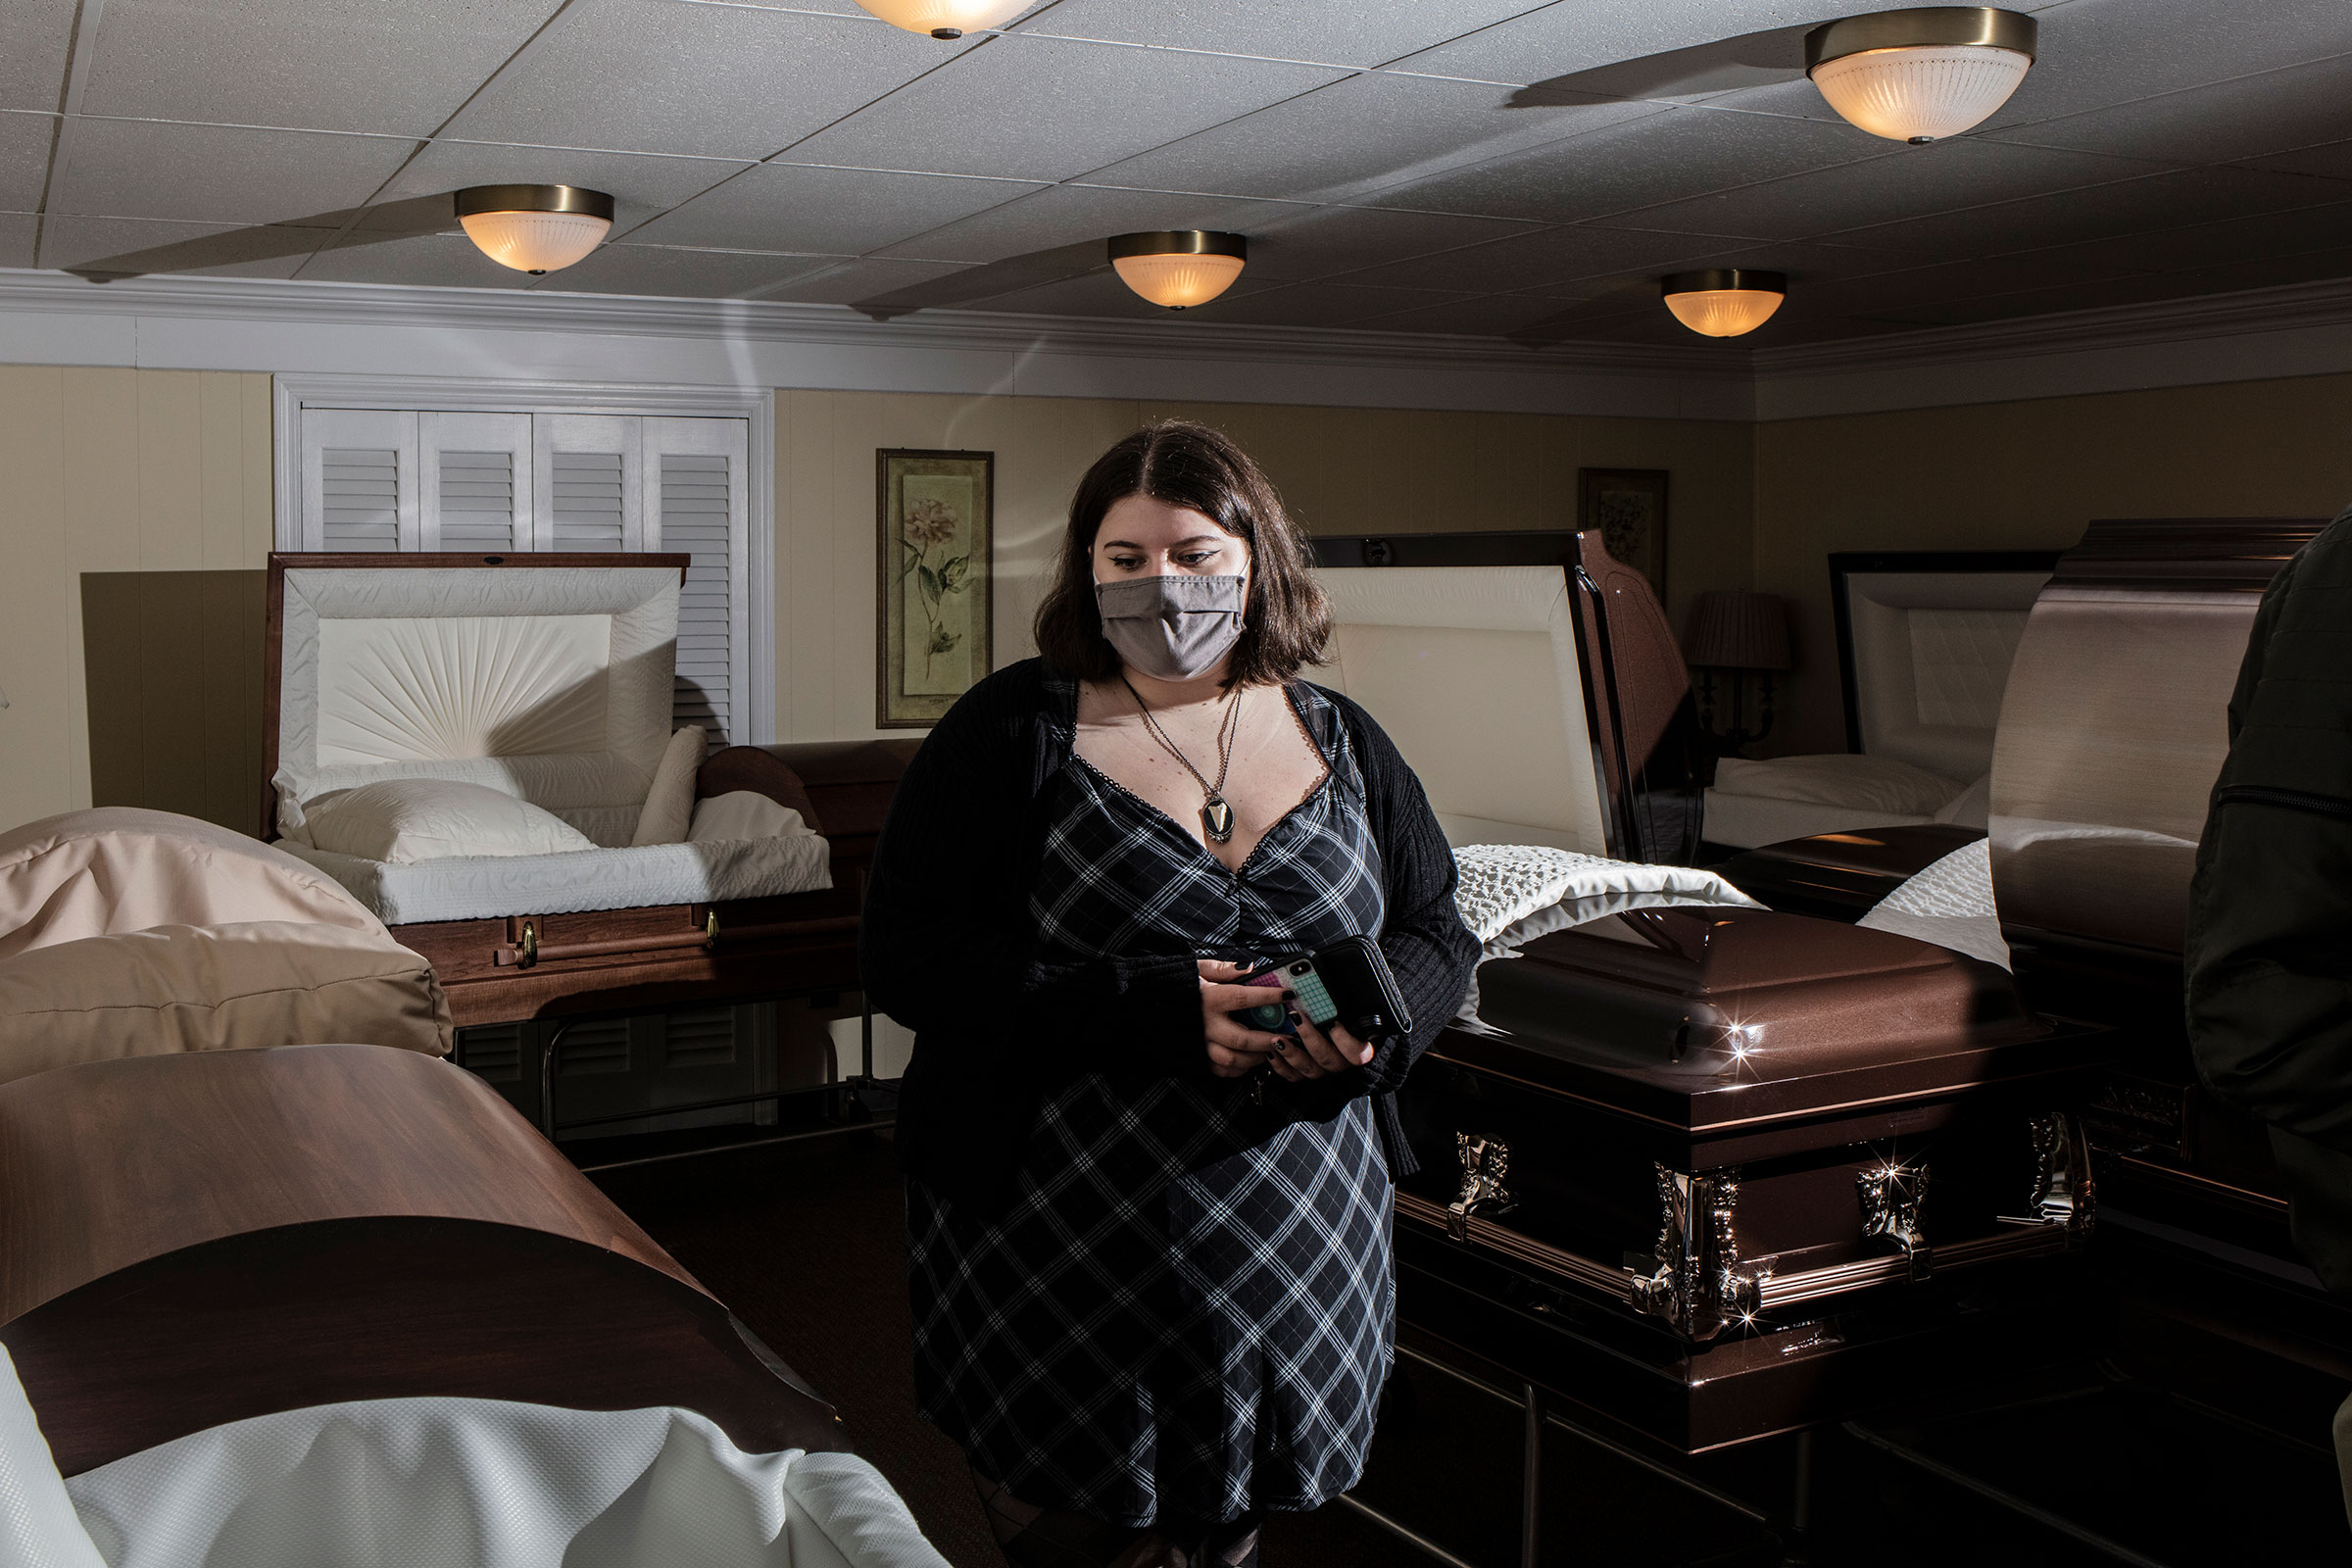 A student examines a casket during a Kean University course on death at Galante Funeral Home. (Bryan Anselm for TIME)